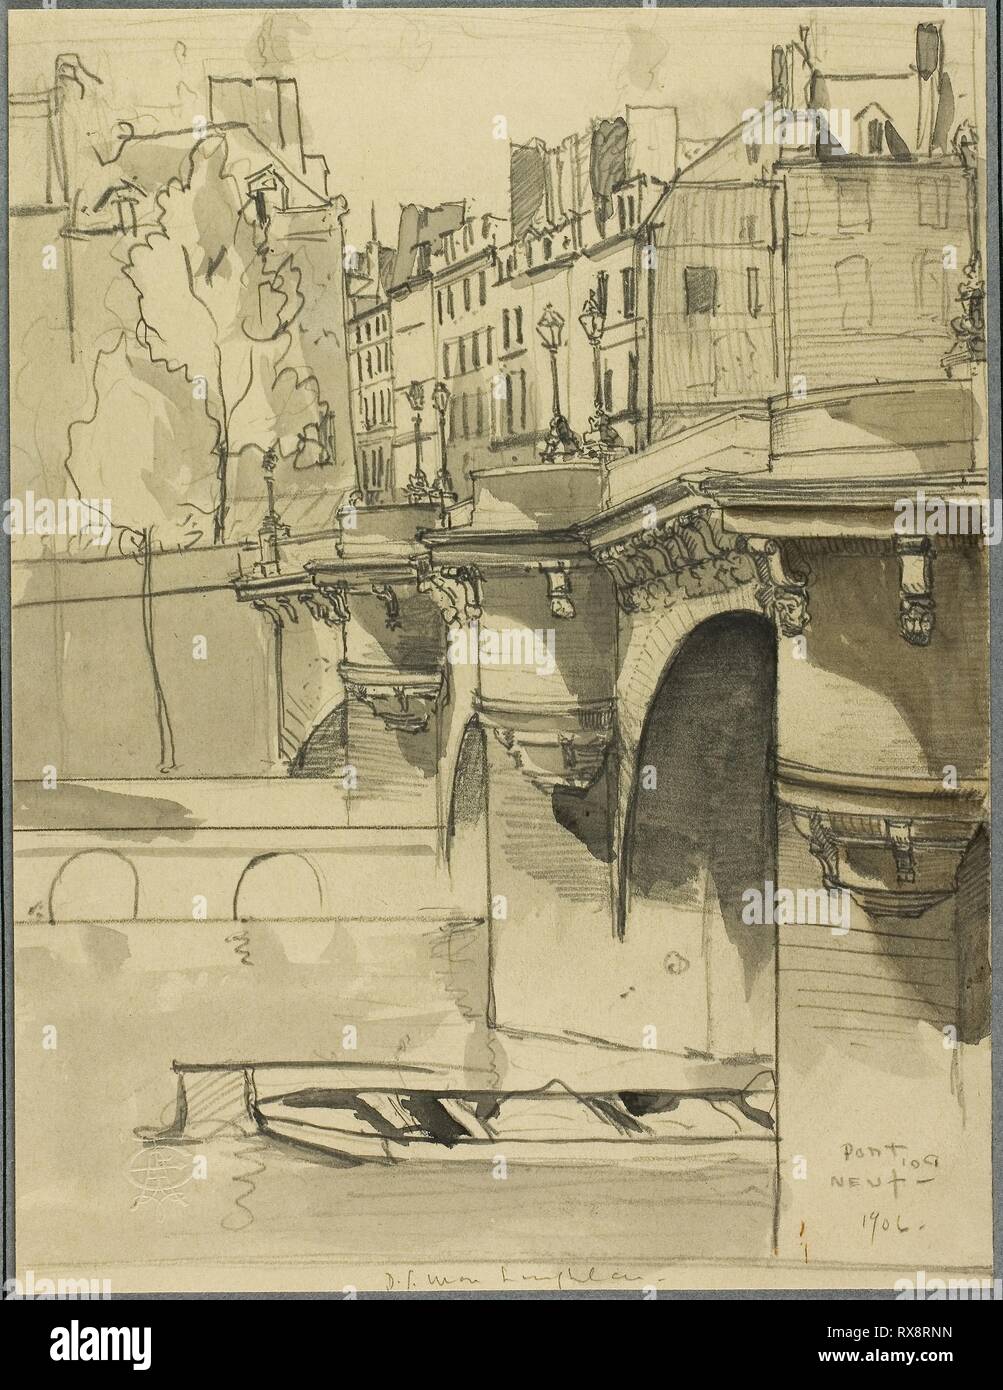 View of the Pont Neuf. Donald Shaw MacLaughlan; American, 1876-1938. Date: 1906. Dimensions: 247 x 189 mm. Graphite with brush and gray and brown wash, on cream wove paper, hinged onto blue wove card. Origin: United States. Museum: The Chicago Art Institute. Stock Photo